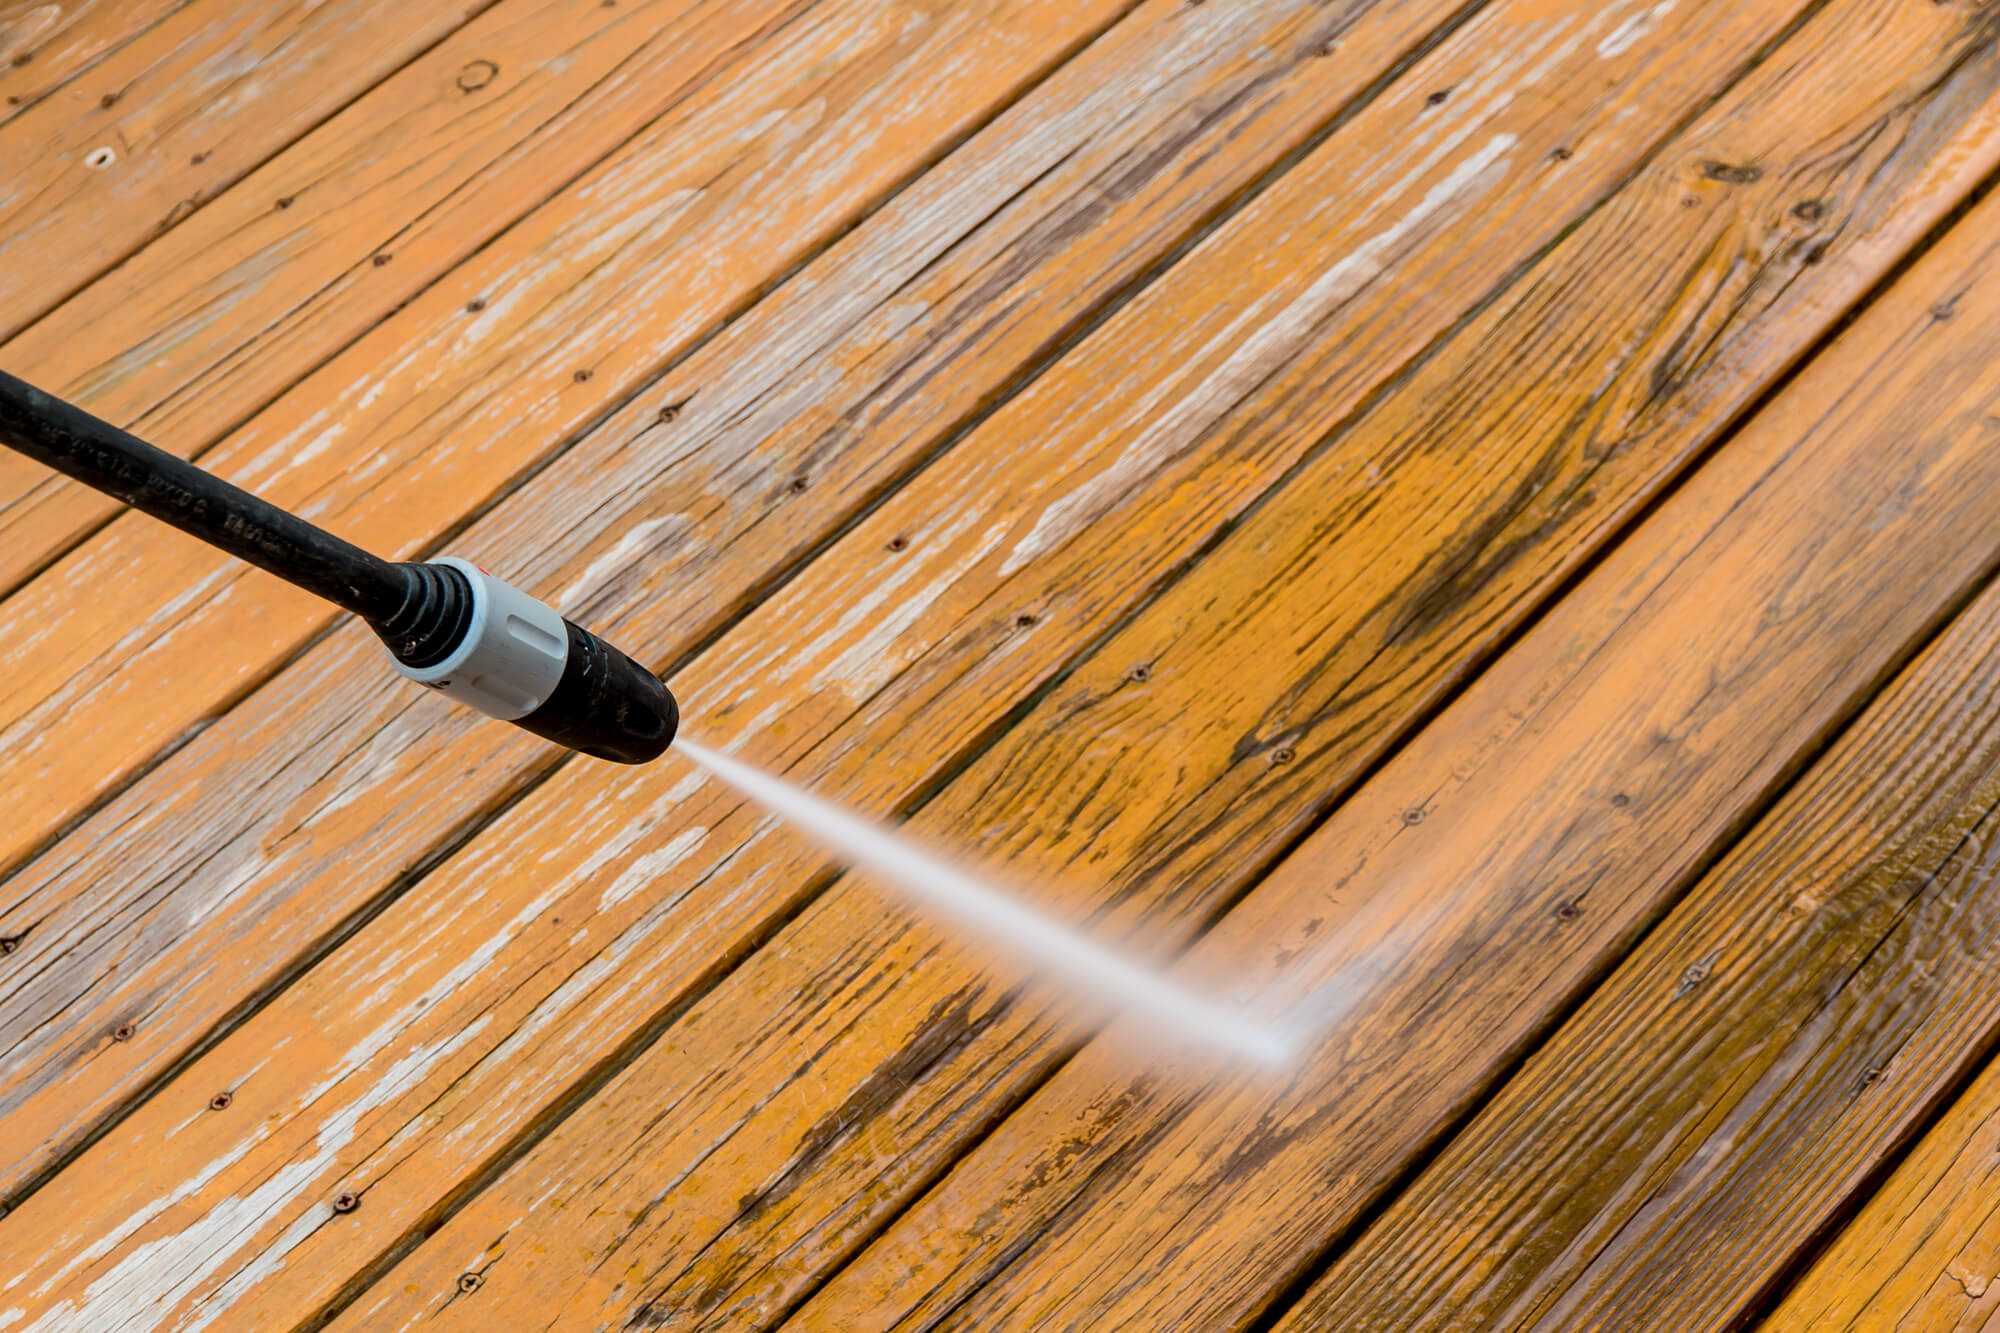 Pressure cleaning services in Rockville MD